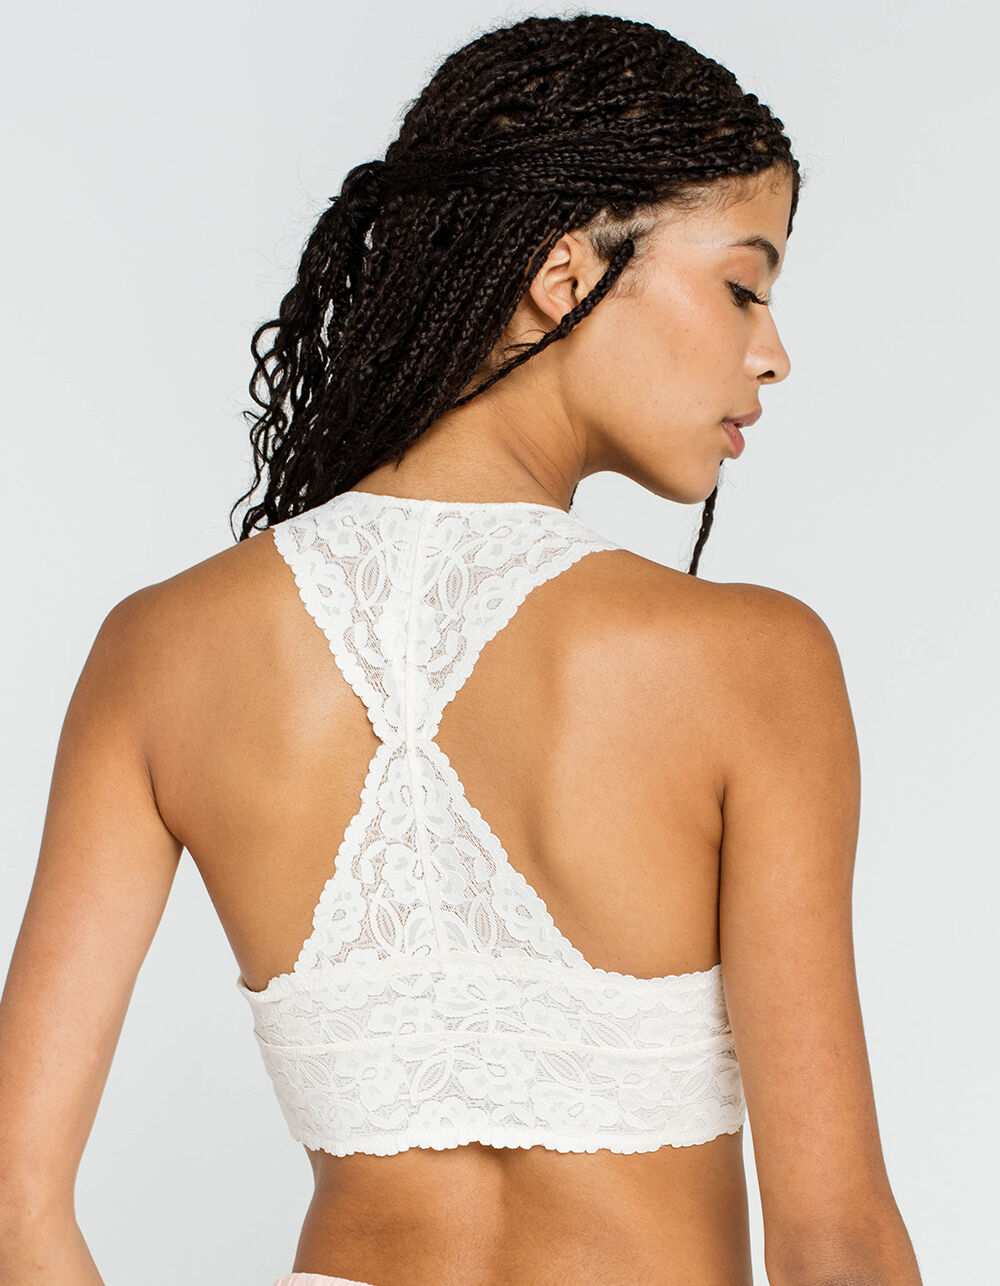 FREE PEOPLE Galloon Lace Racerback Ivory Bralette - IVORY